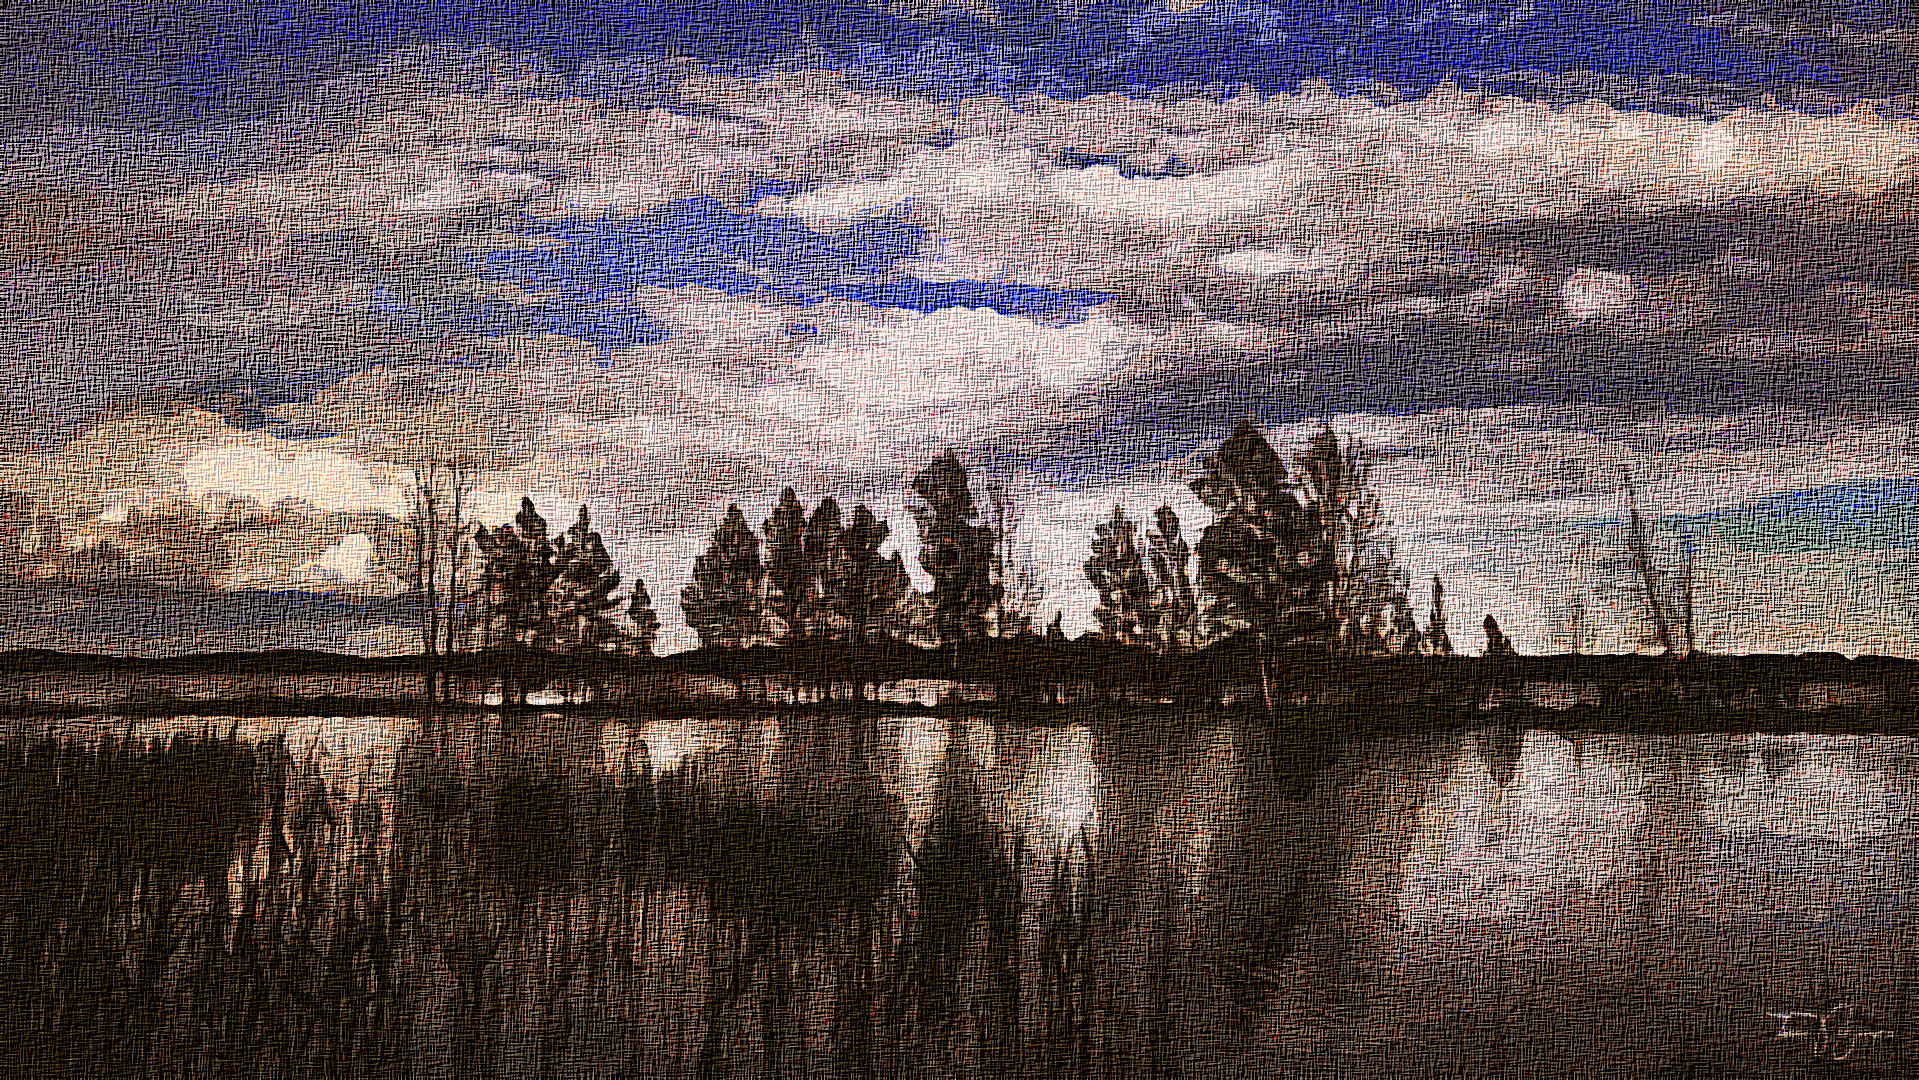 trees_by_the_lagoon_by_pajunen_Graphic_Effect_Illustration_Jvid_X2D.jpg